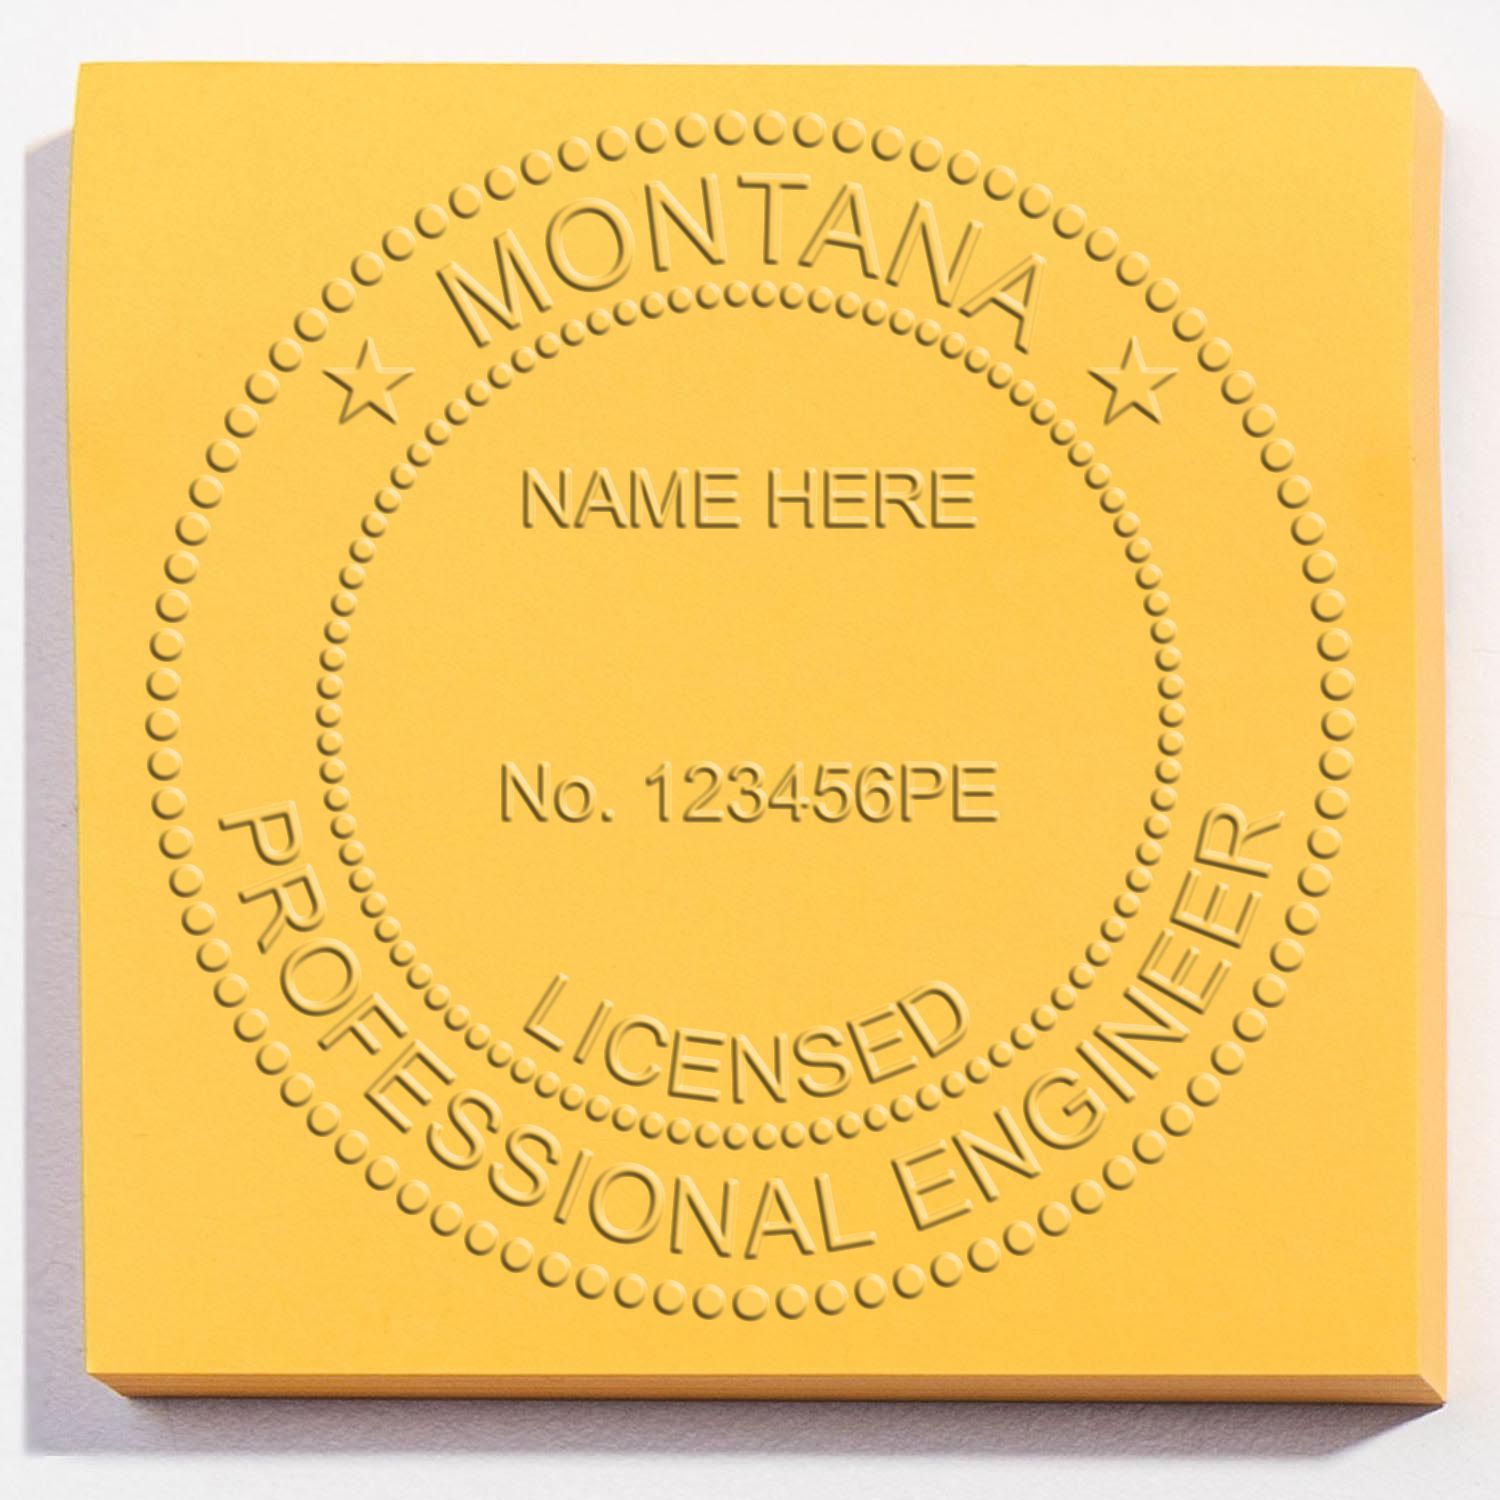 The main image for the Handheld Montana Professional Engineer Embosser depicting a sample of the imprint and electronic files